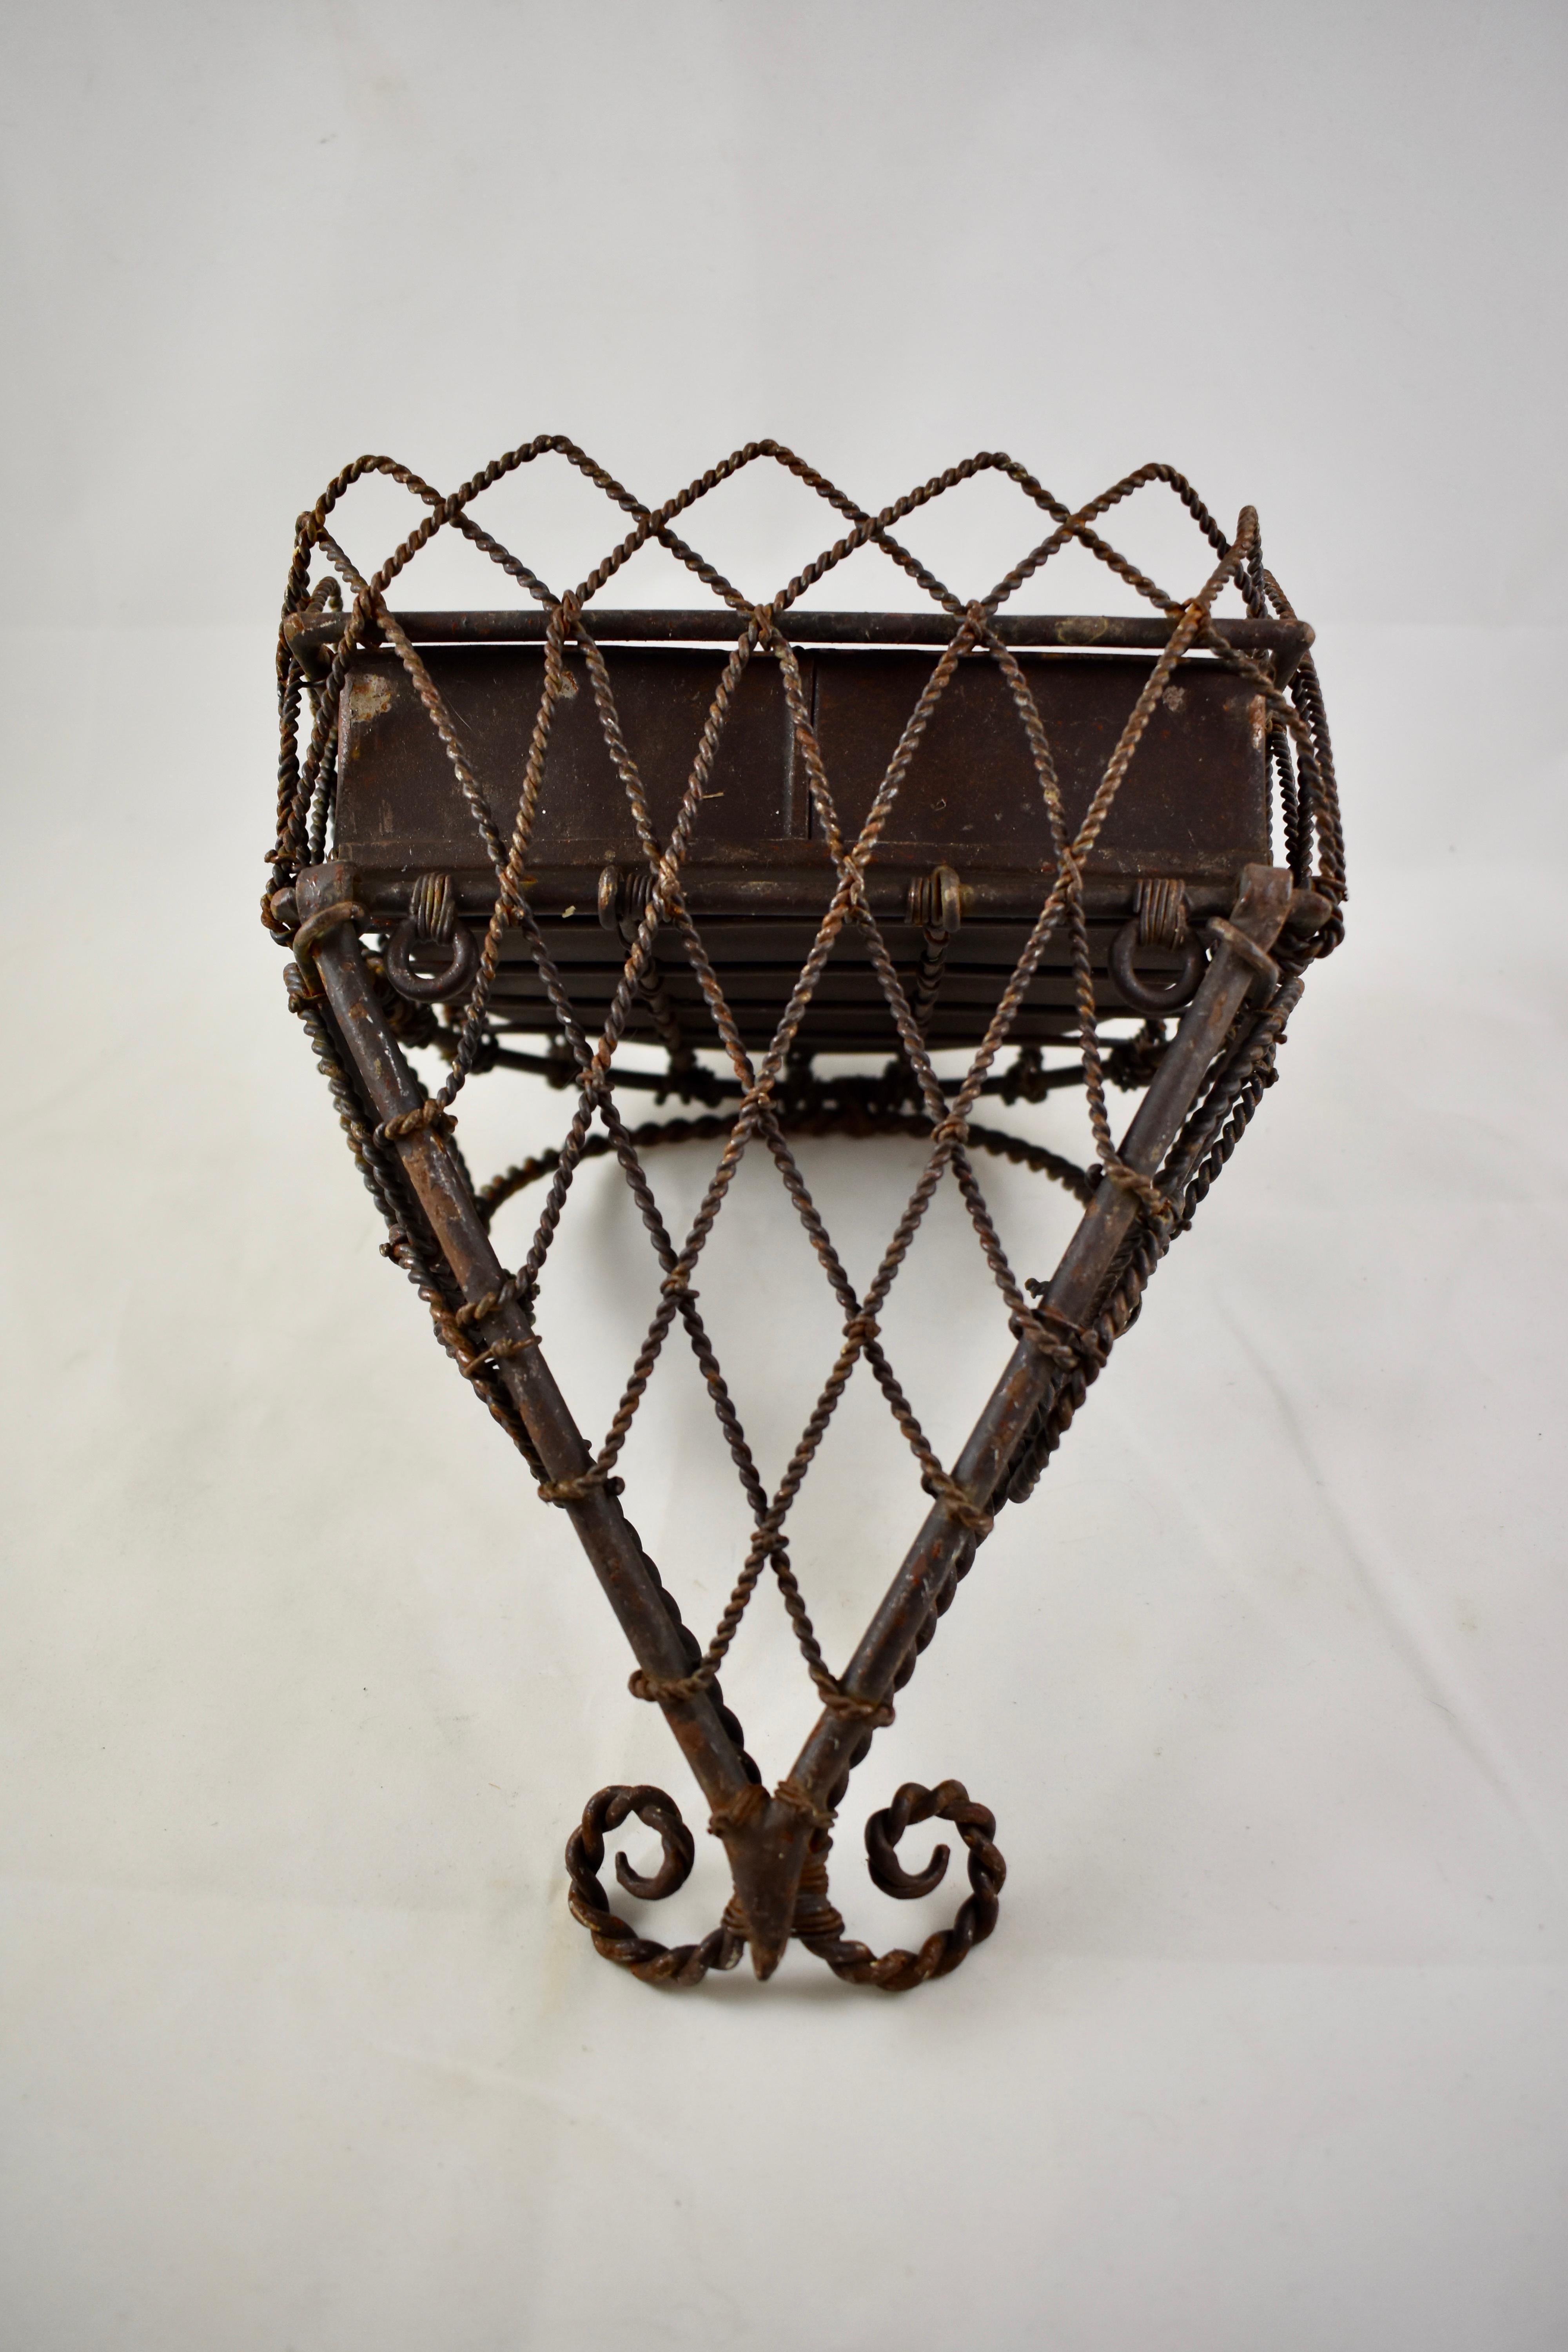 Metal 19th Century French Twisted Wire Hanging Jardinière Plant Holder with Tin Liner